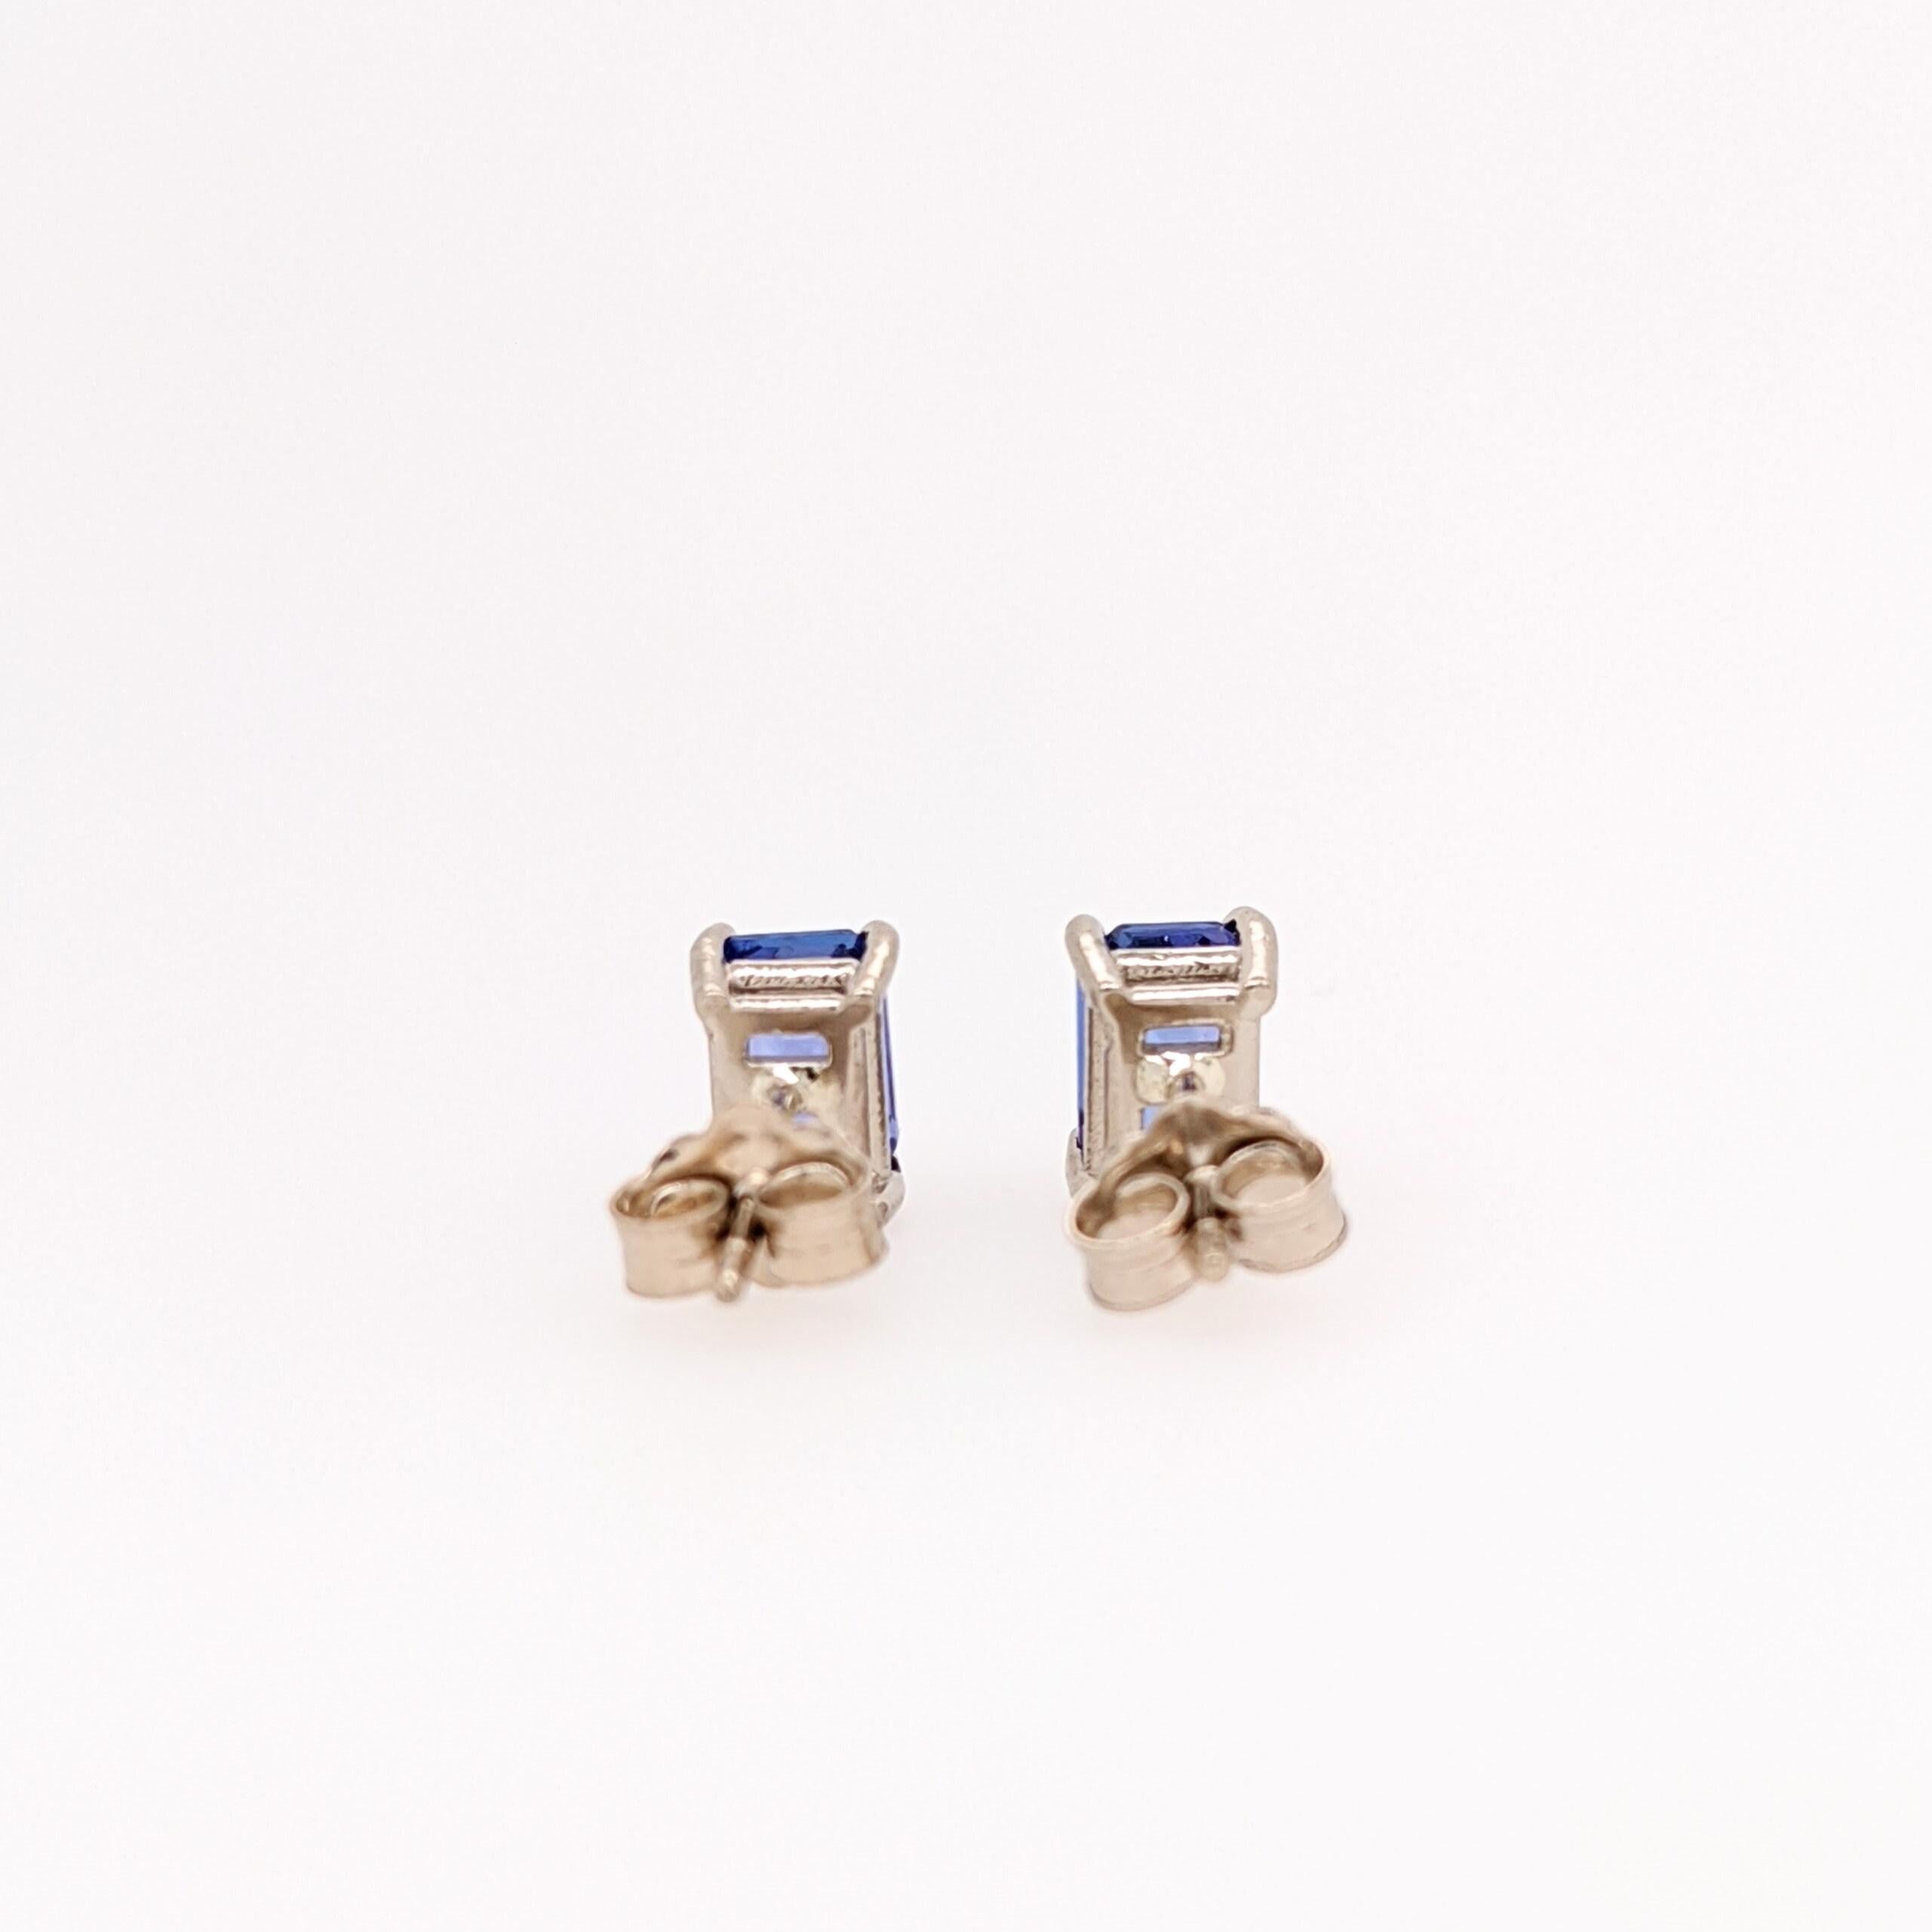 Tanzanite Earring Studs in 14K Solid White, Yellow or Rose Gold  Emerald Cut 6x4 In New Condition For Sale In Columbus, OH